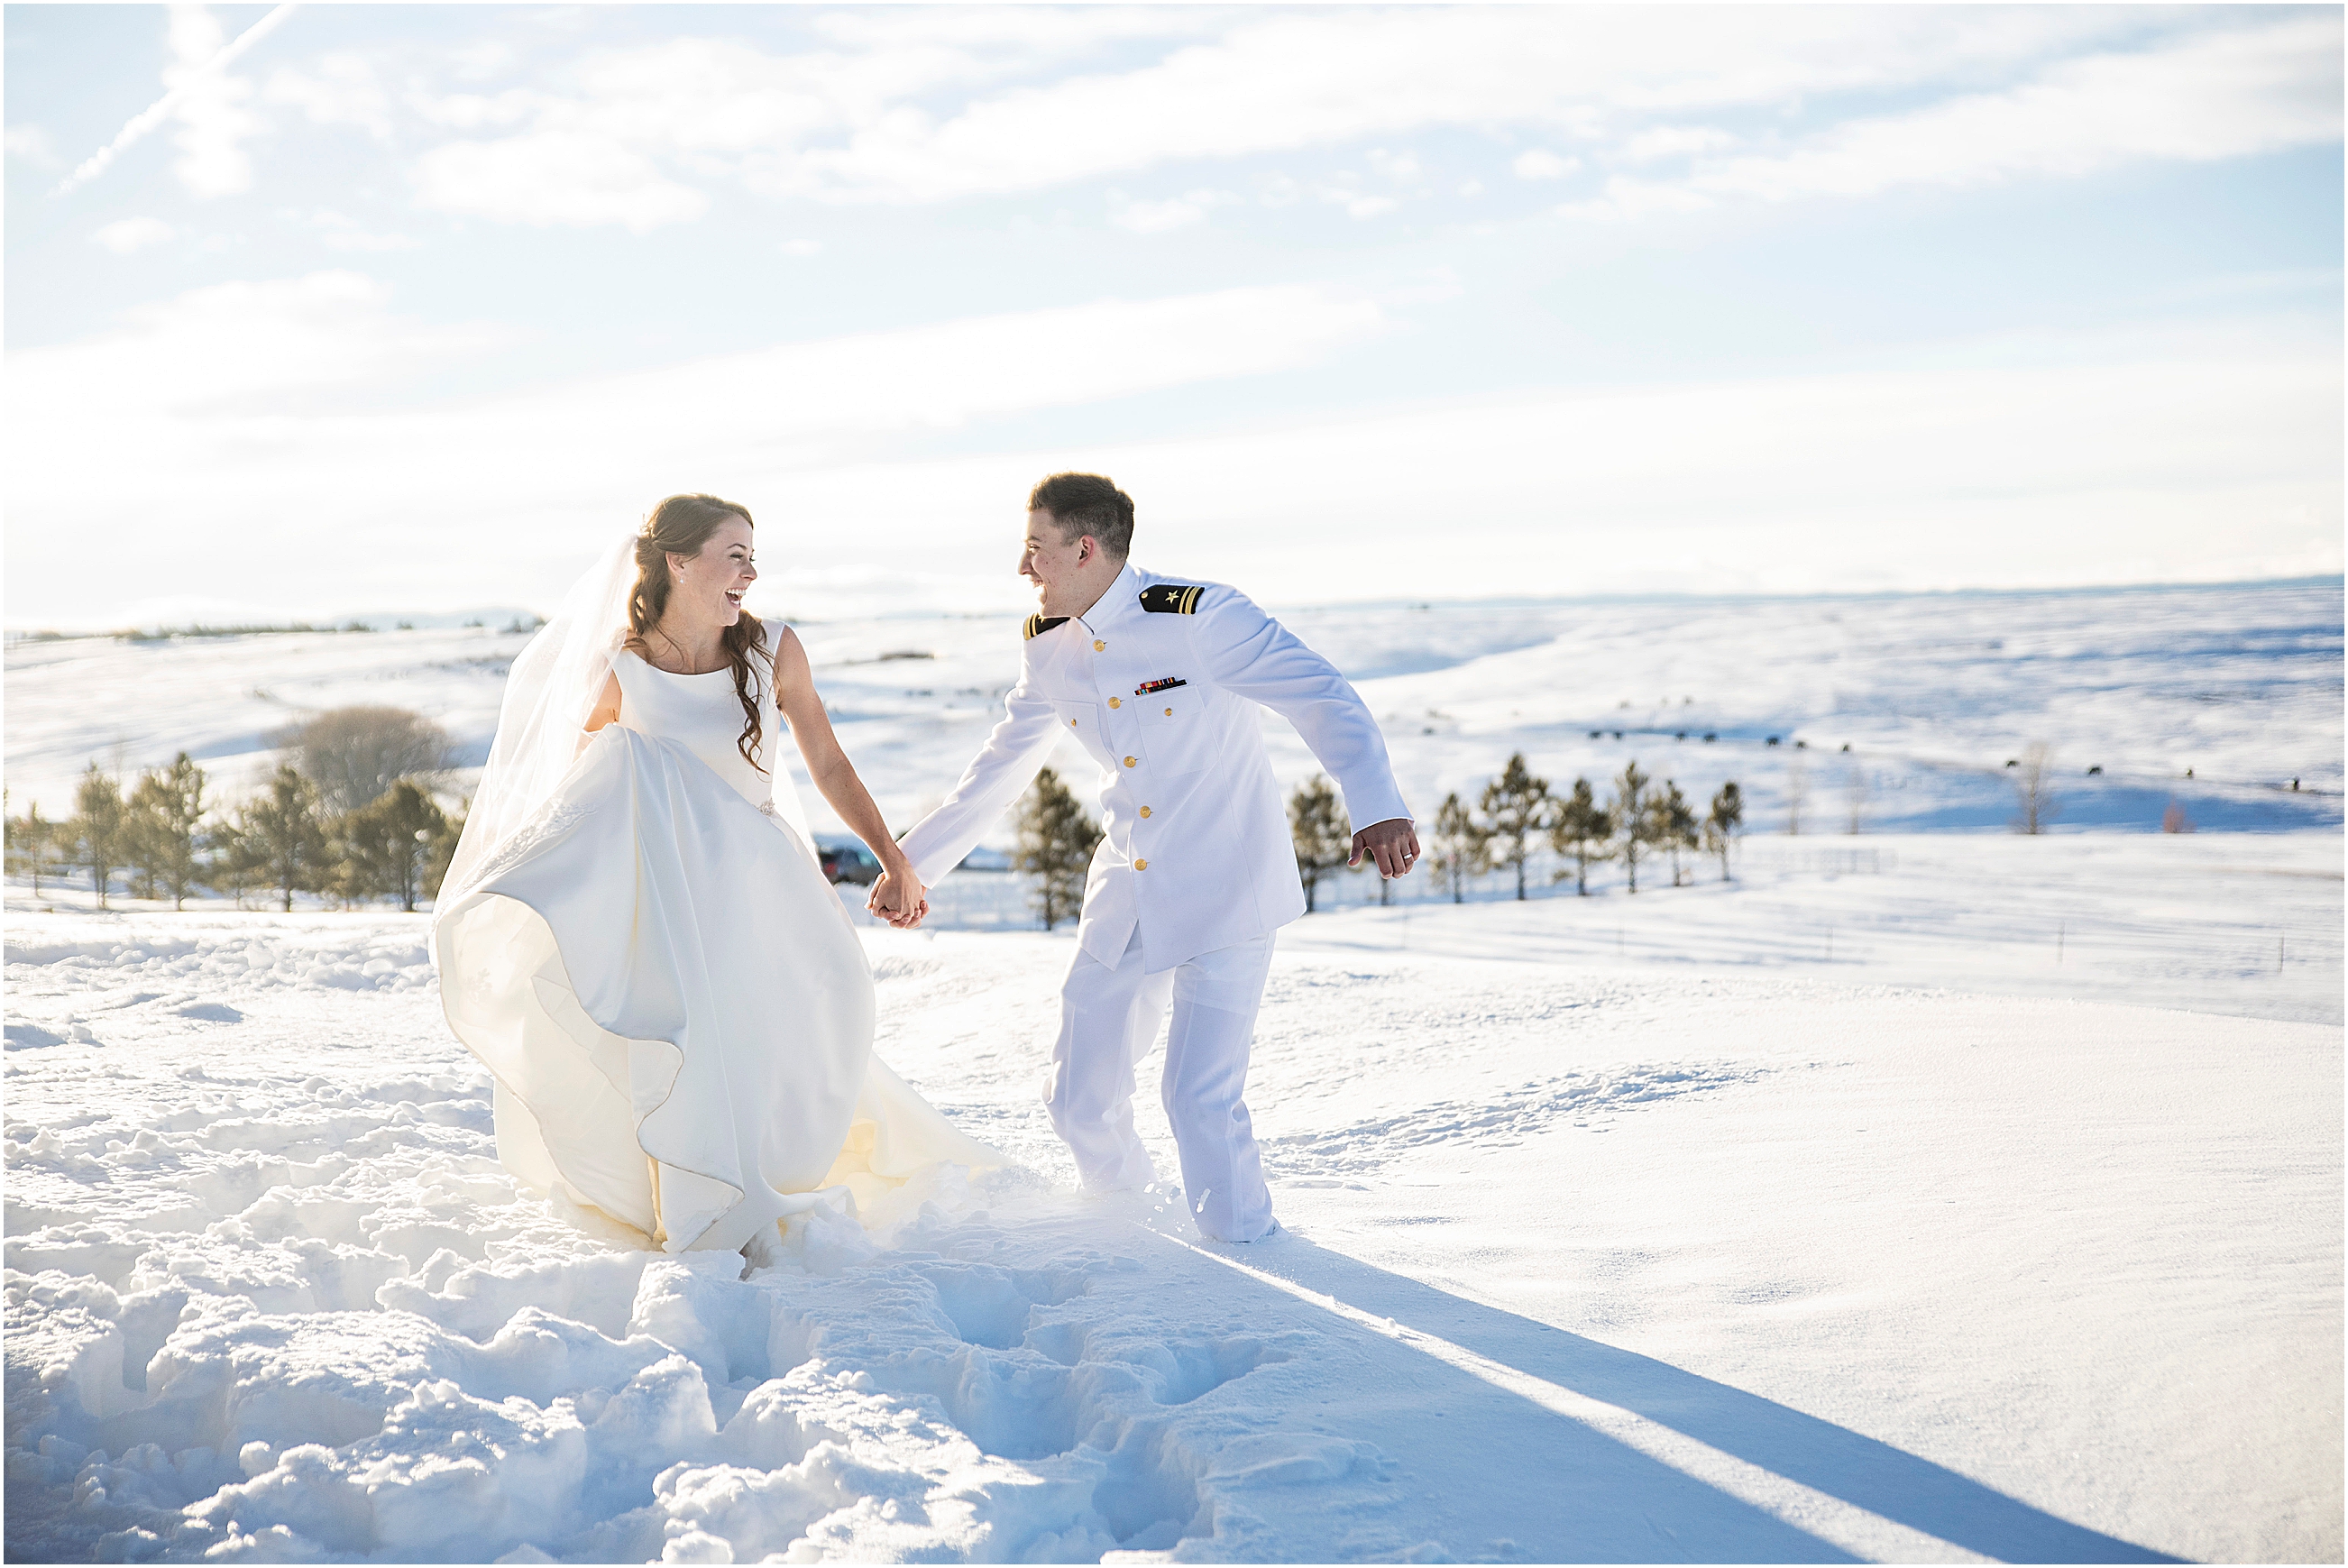 Bride and groom frolic in the deep snow in a field at a winter wedding, groom is in Navy dress whites